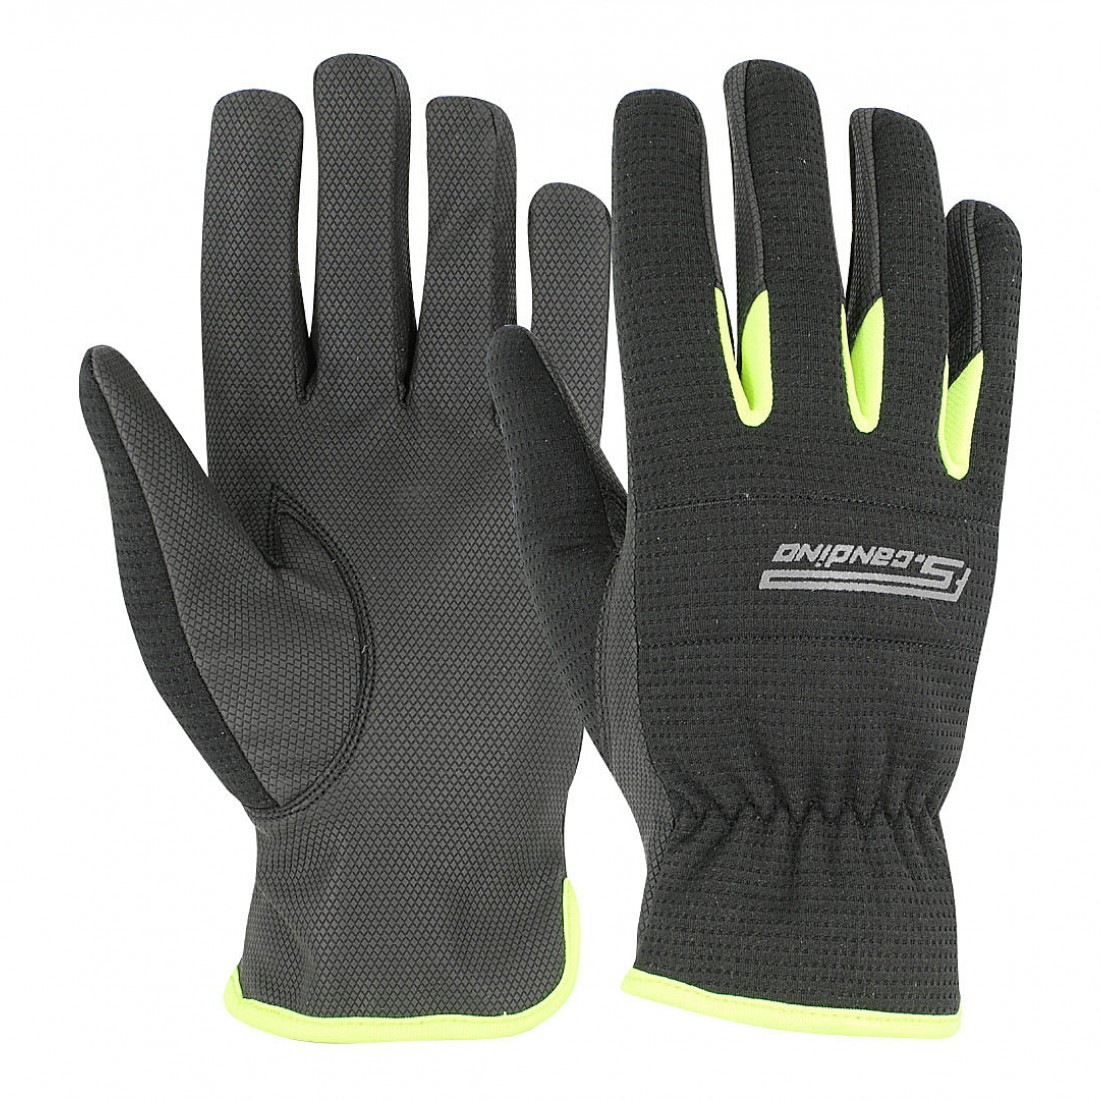  PU leather Gloves Excellent Quality